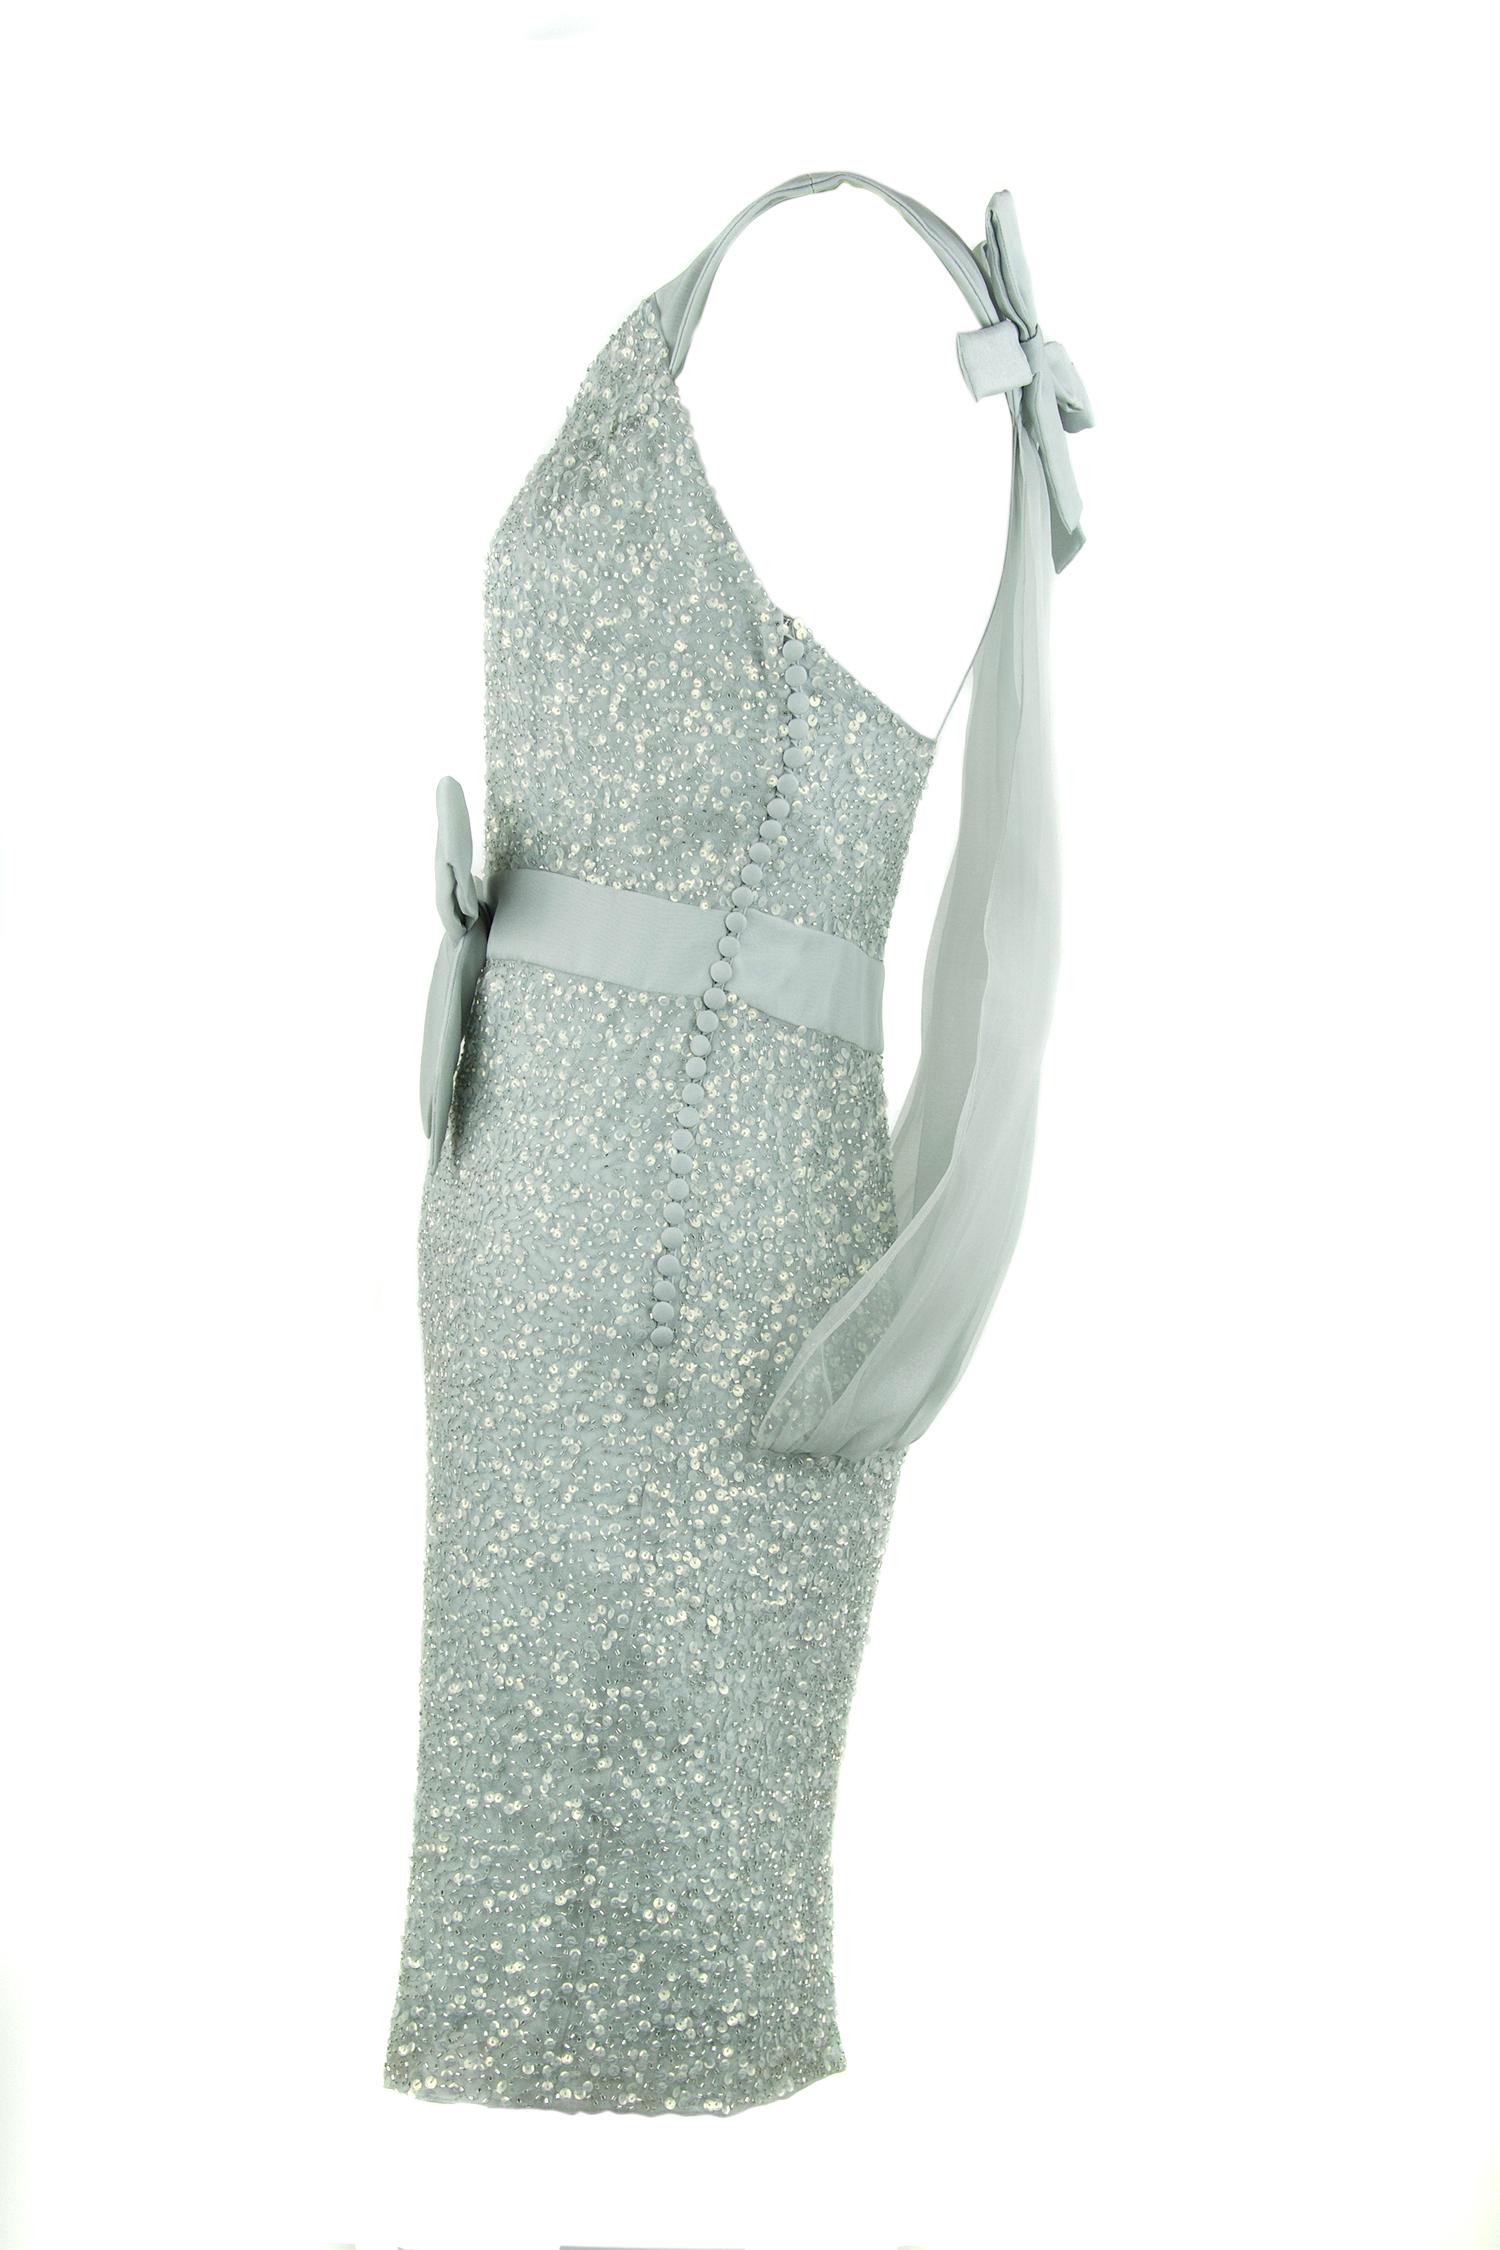 Incredible Christian Dior piece, the epitome of classic and sophisticated with a element of glamour.  Gray with a slight tint of light blue, this dress is adorned in sequins.  A beautiful organza overlay on the back of the dress with an elegant bow